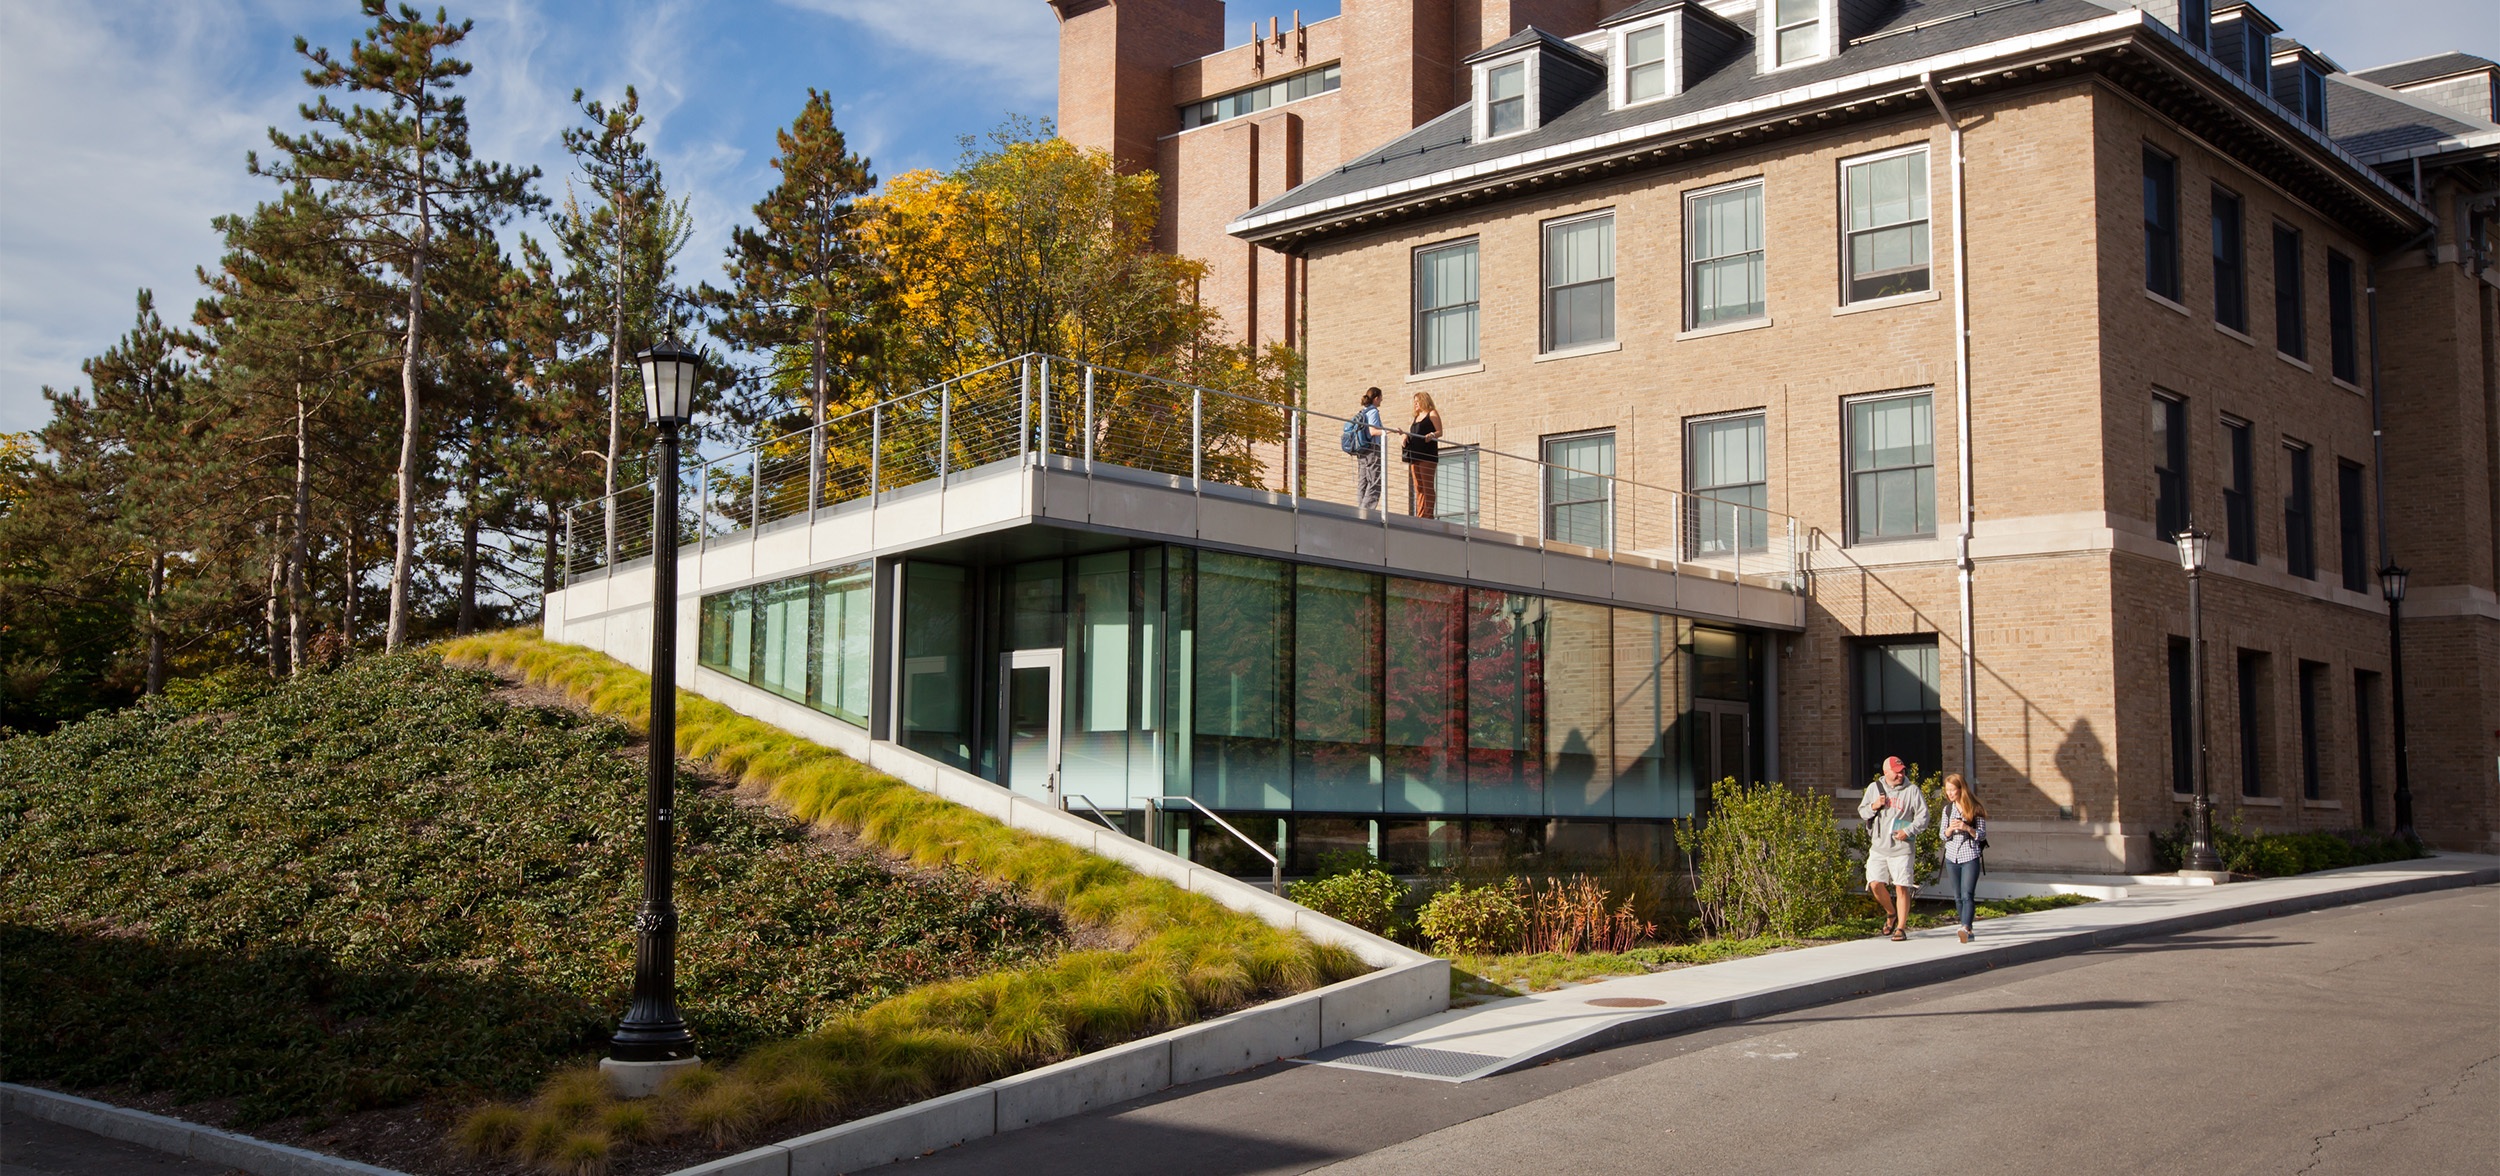 Fernow hall was built into the side of a hill with a roof top garden.